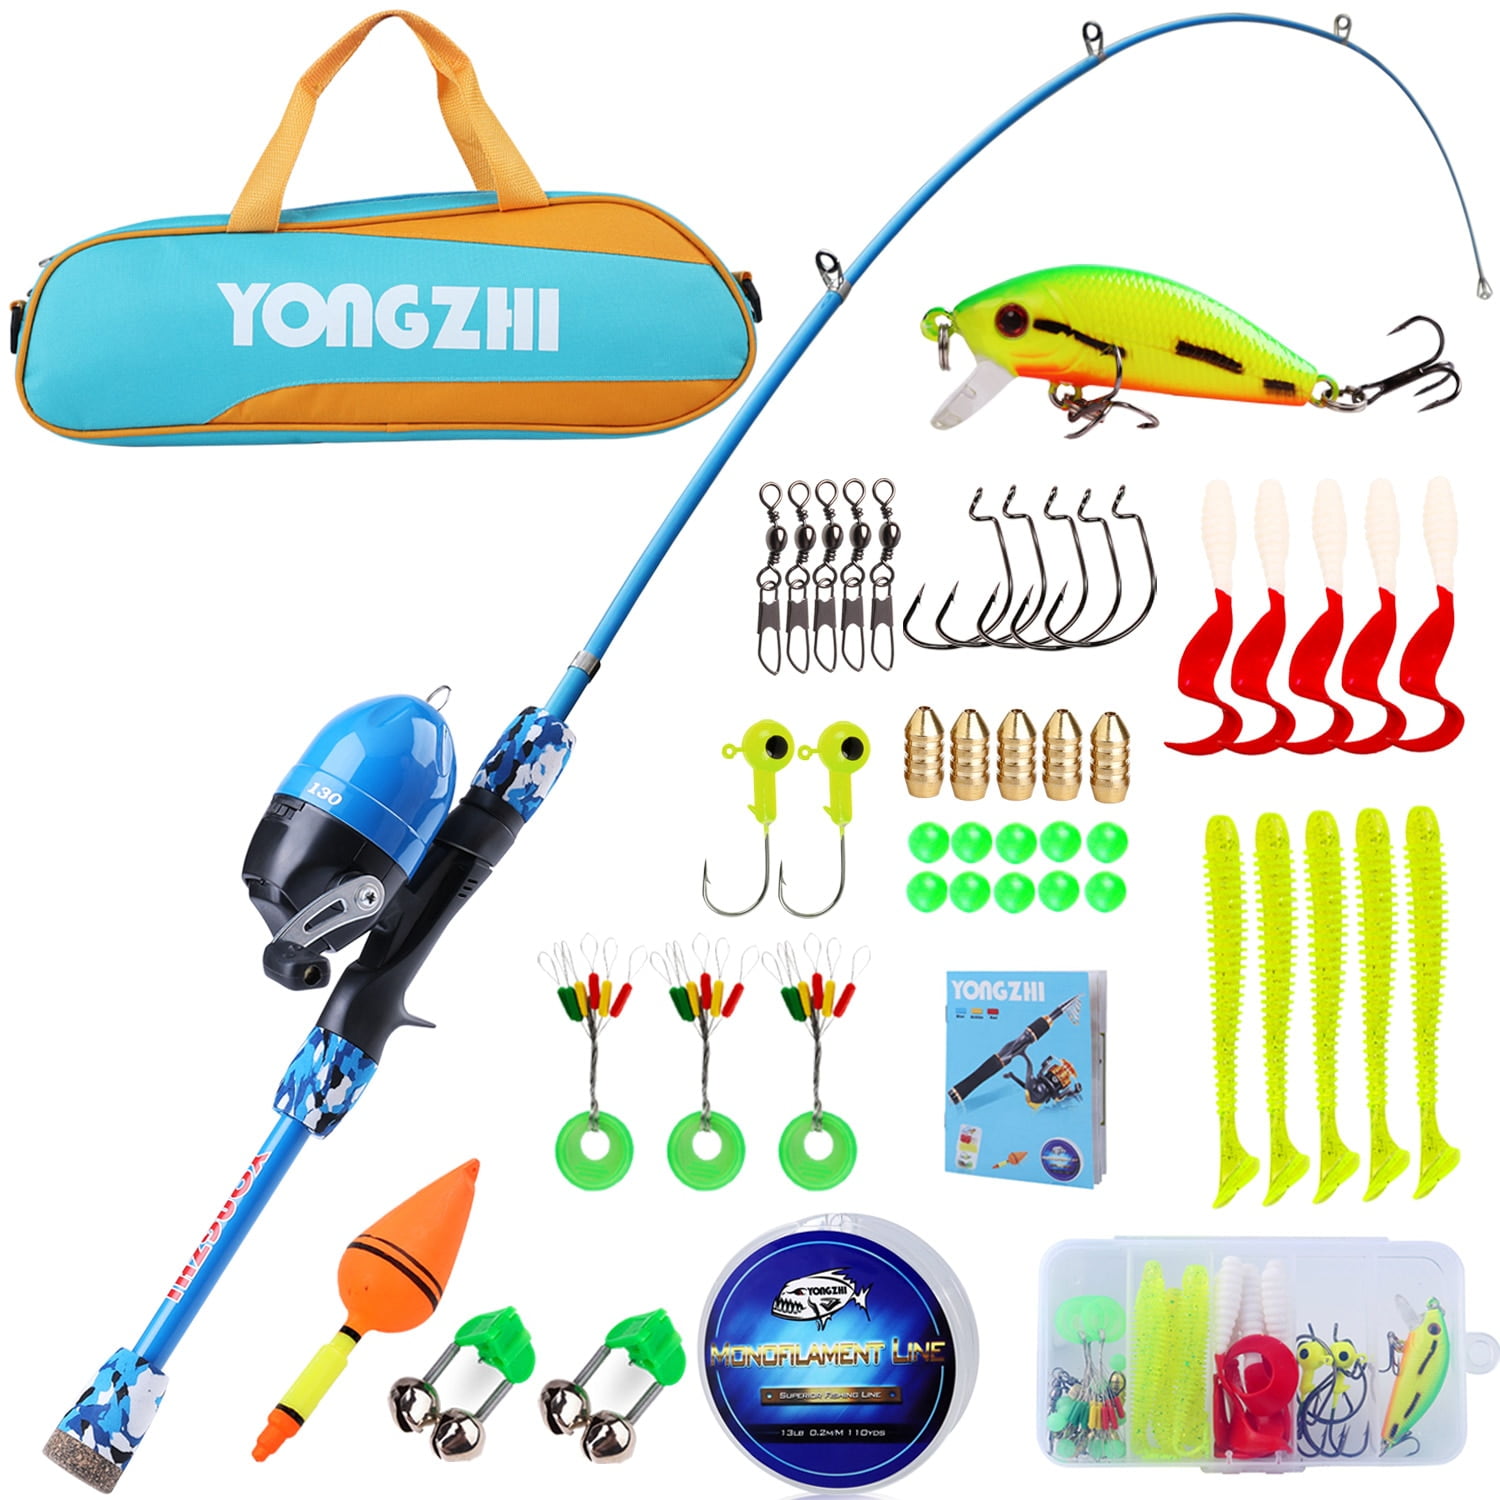 Portable Kids Fishing Pole Kit Travel Tote Telescopic Fishing Rod with Reel  Fishing Gears Accessories for Starter Toddler